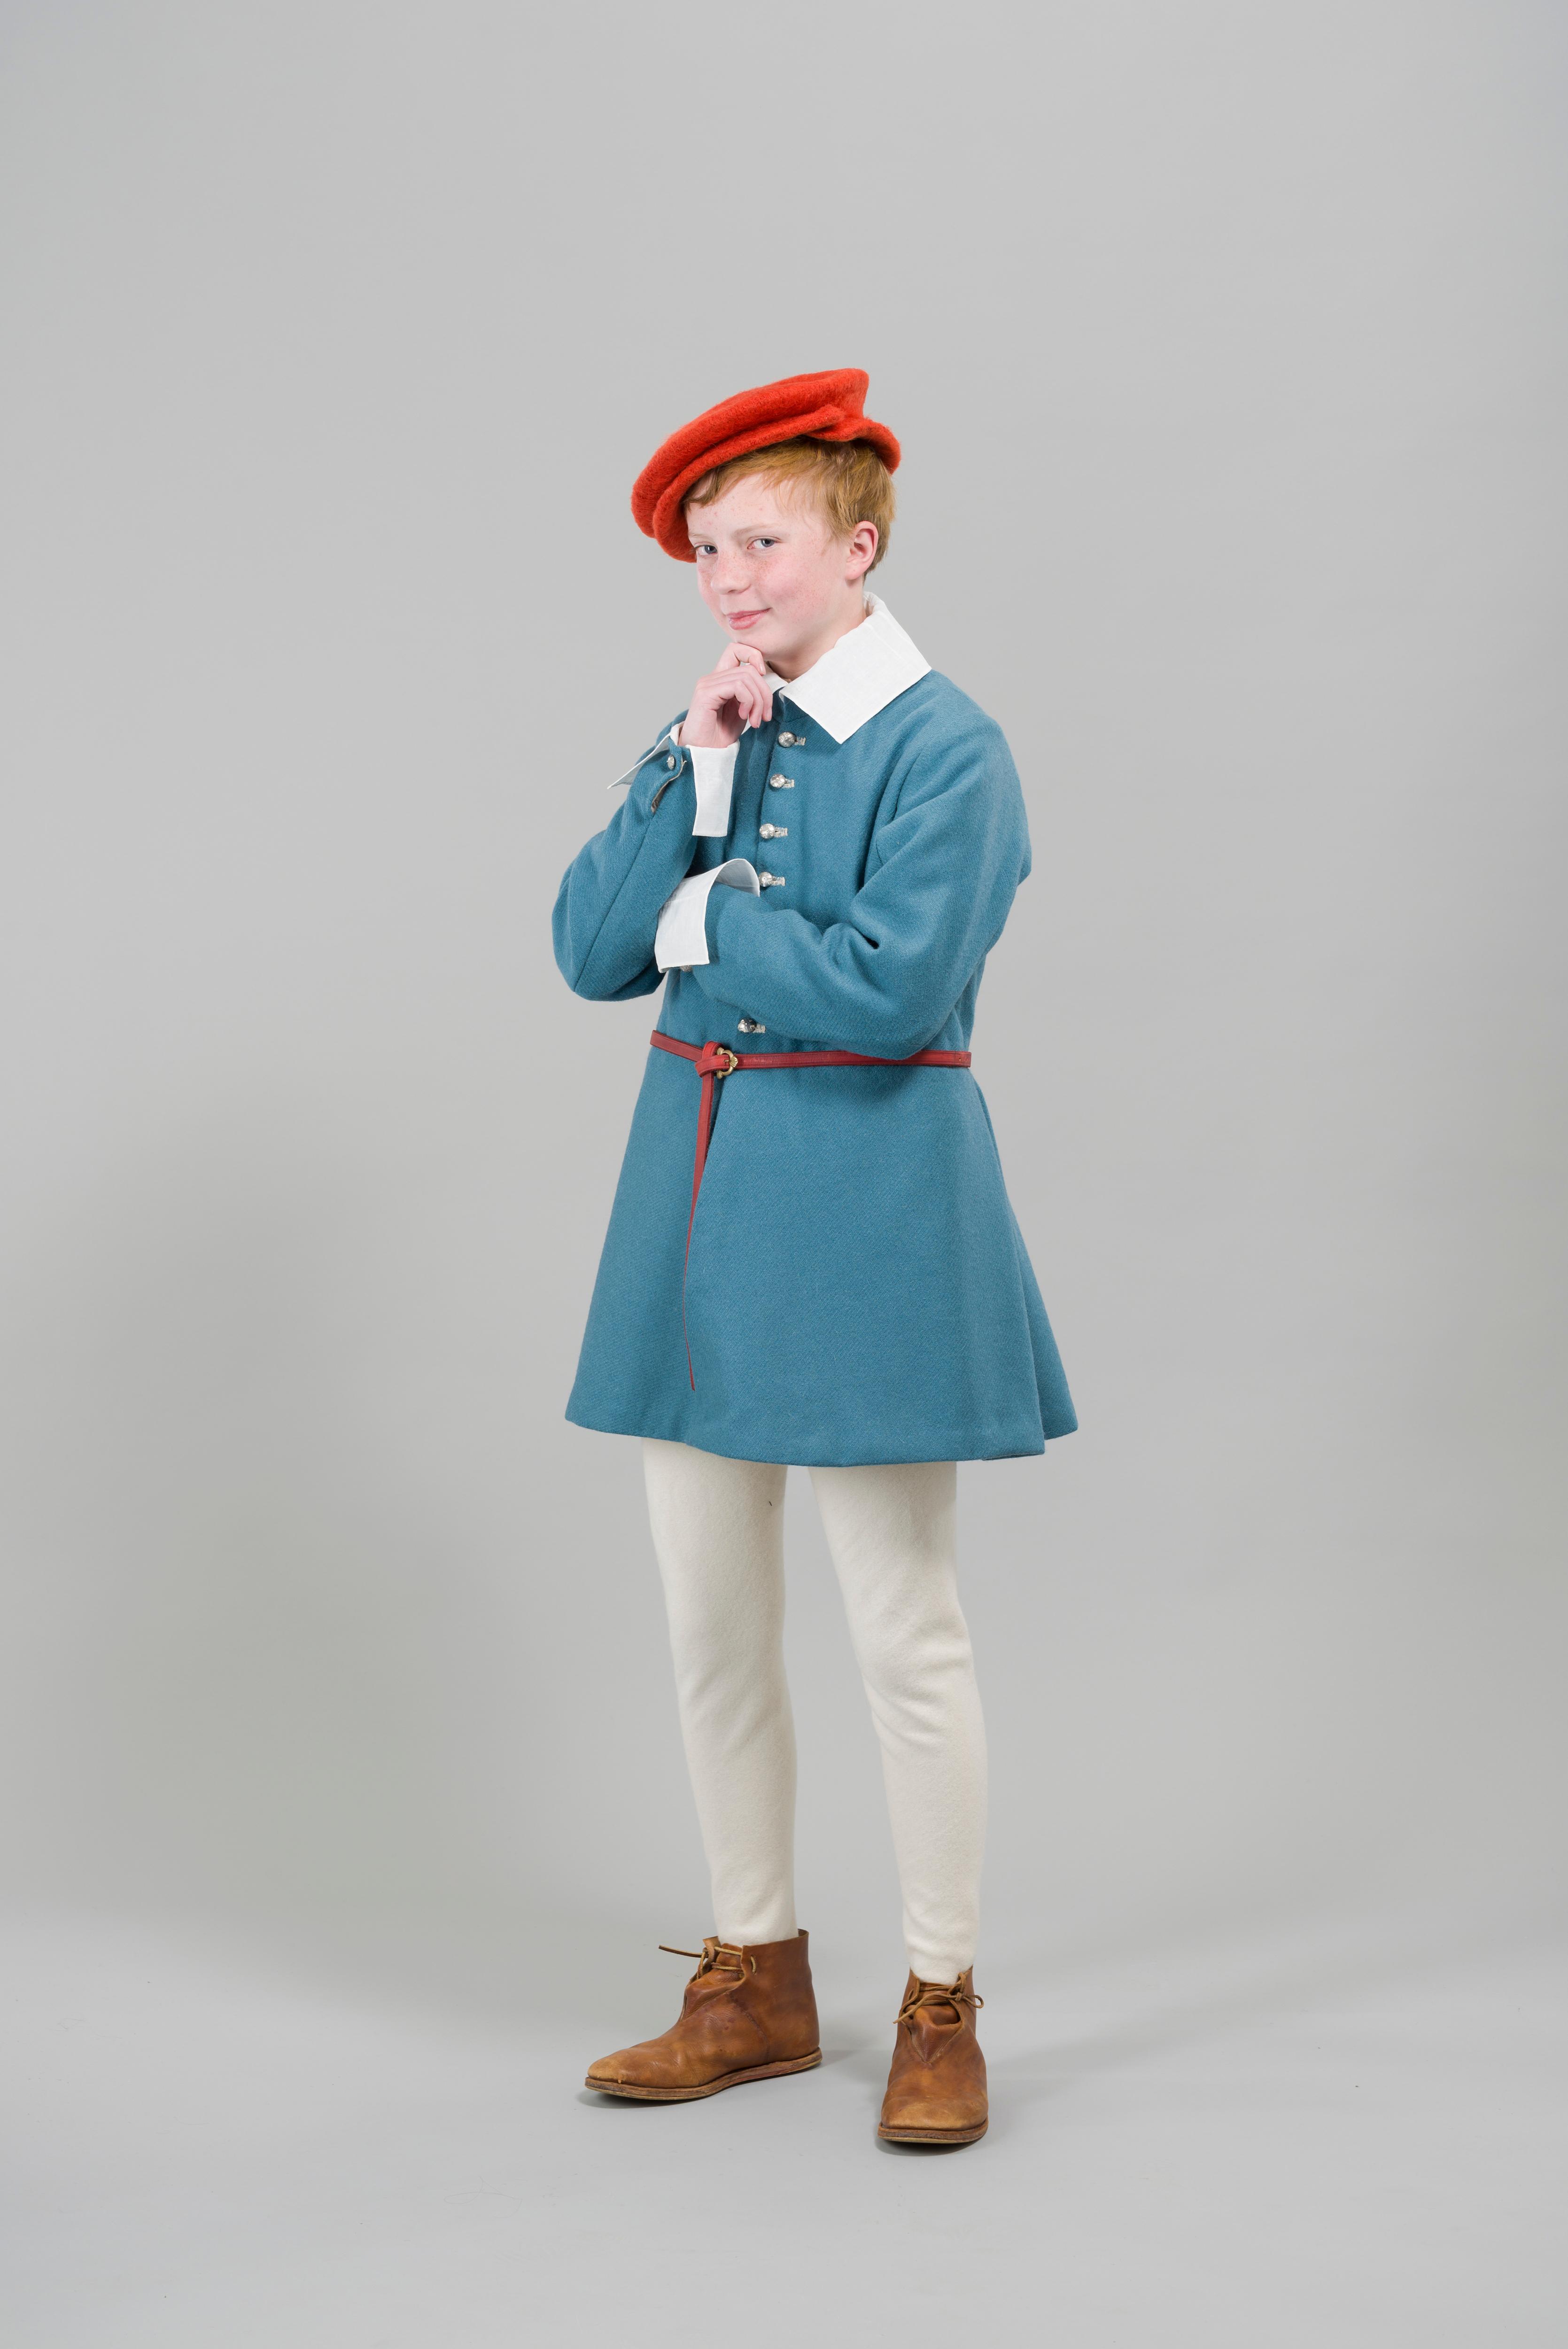 A servant's blue coat based on the musicians' clothes in 'The Prodigal Son'